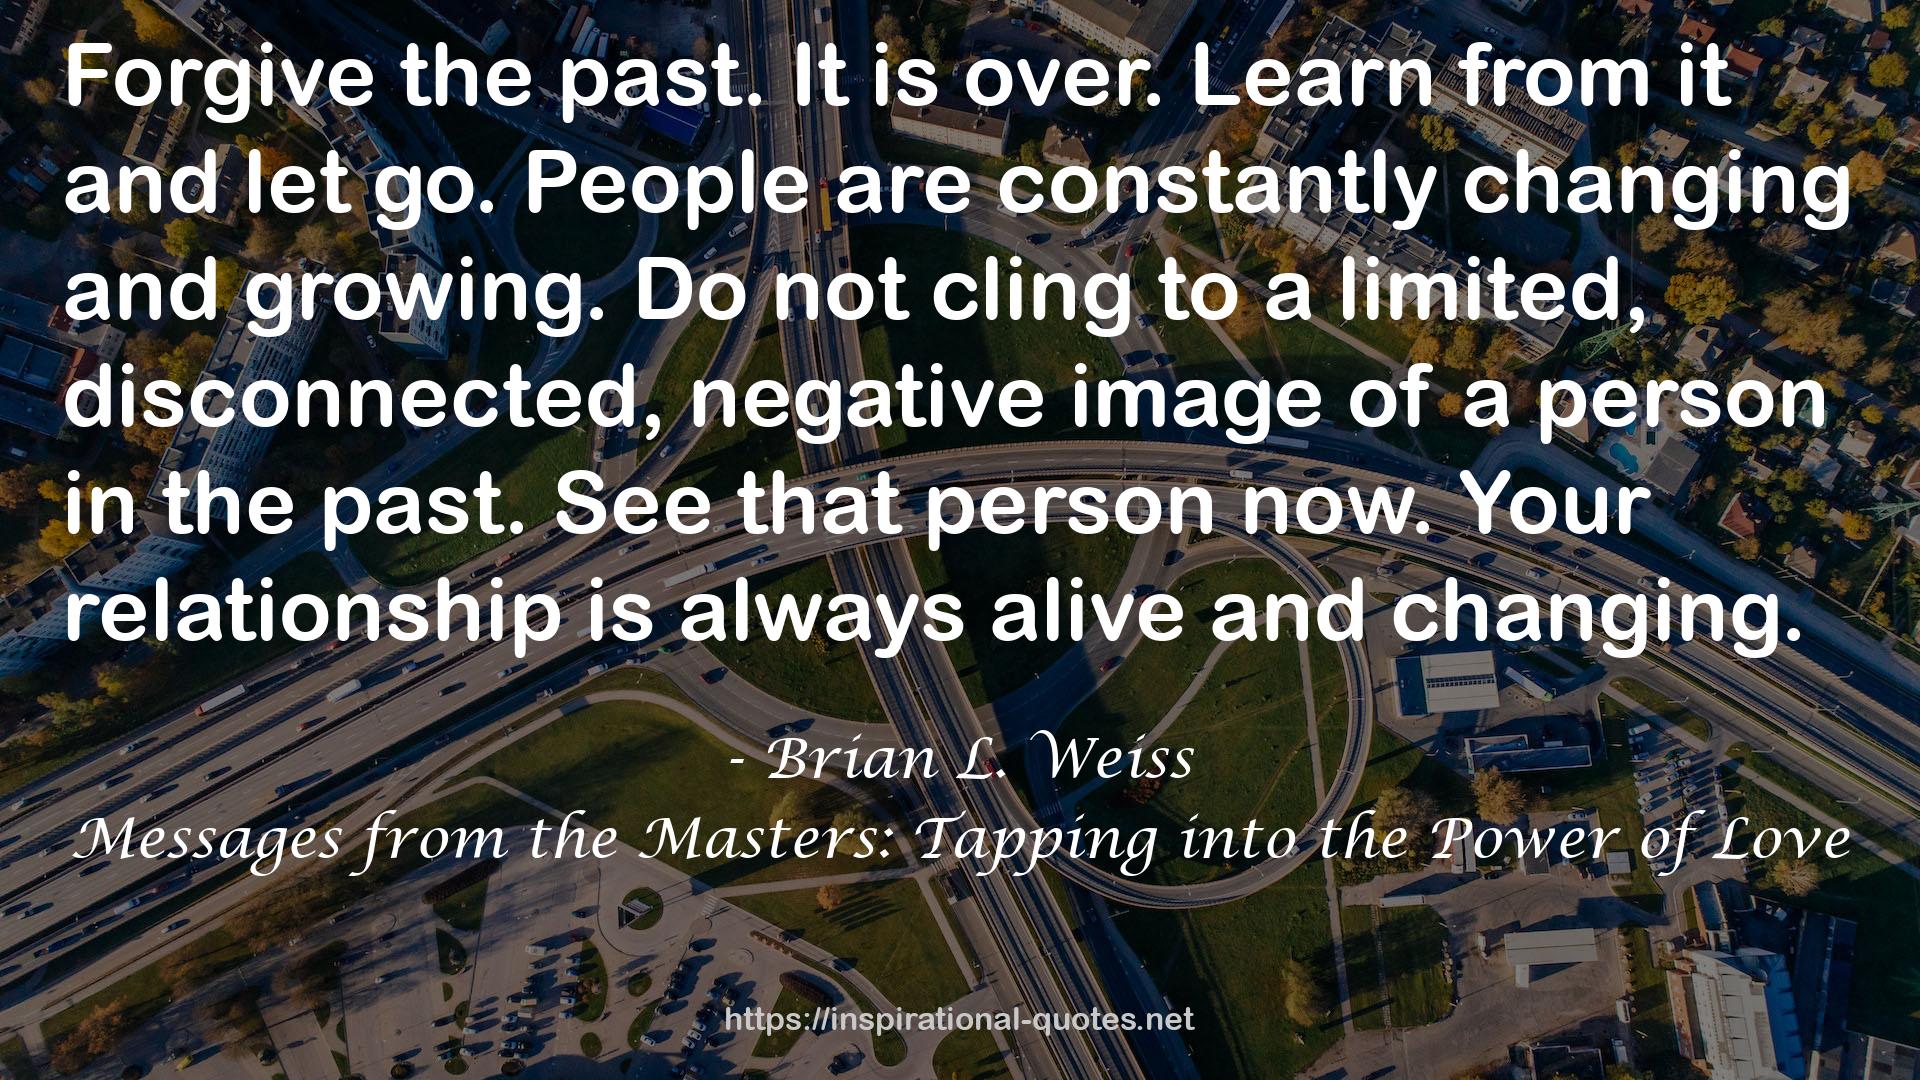 Messages from the Masters: Tapping into the Power of Love QUOTES